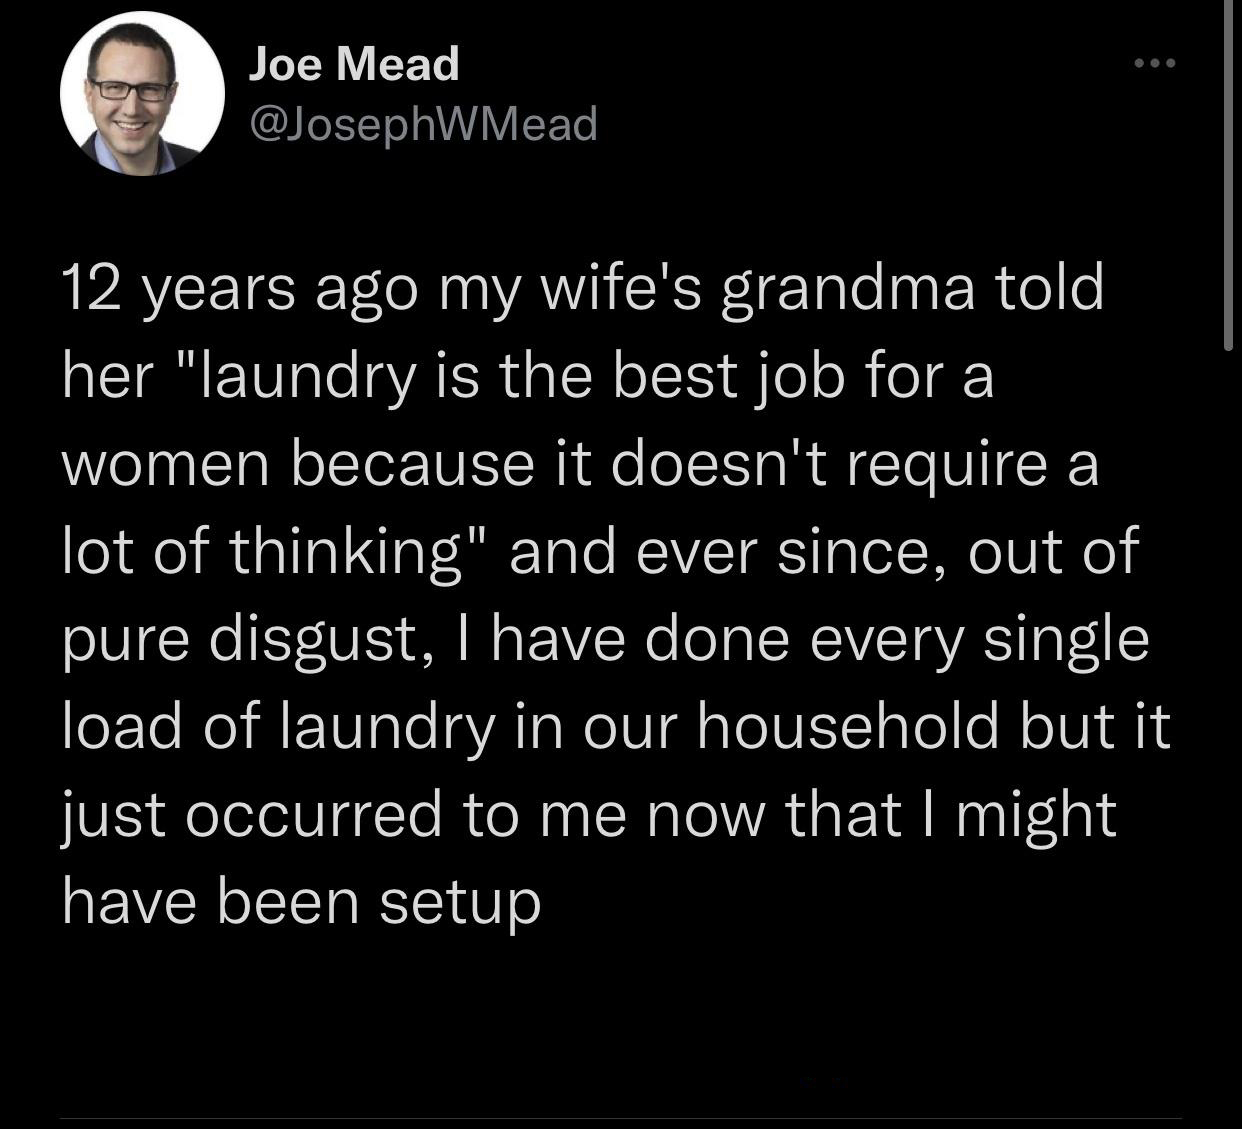 Pisces - Joe Mead 12 years ago my wife's grandma told her "laundry is the best job for a women because it doesn't require a lot of thinking" and ever since, out of pure disgust, I have done every single load of laundry in our household but it just occurre